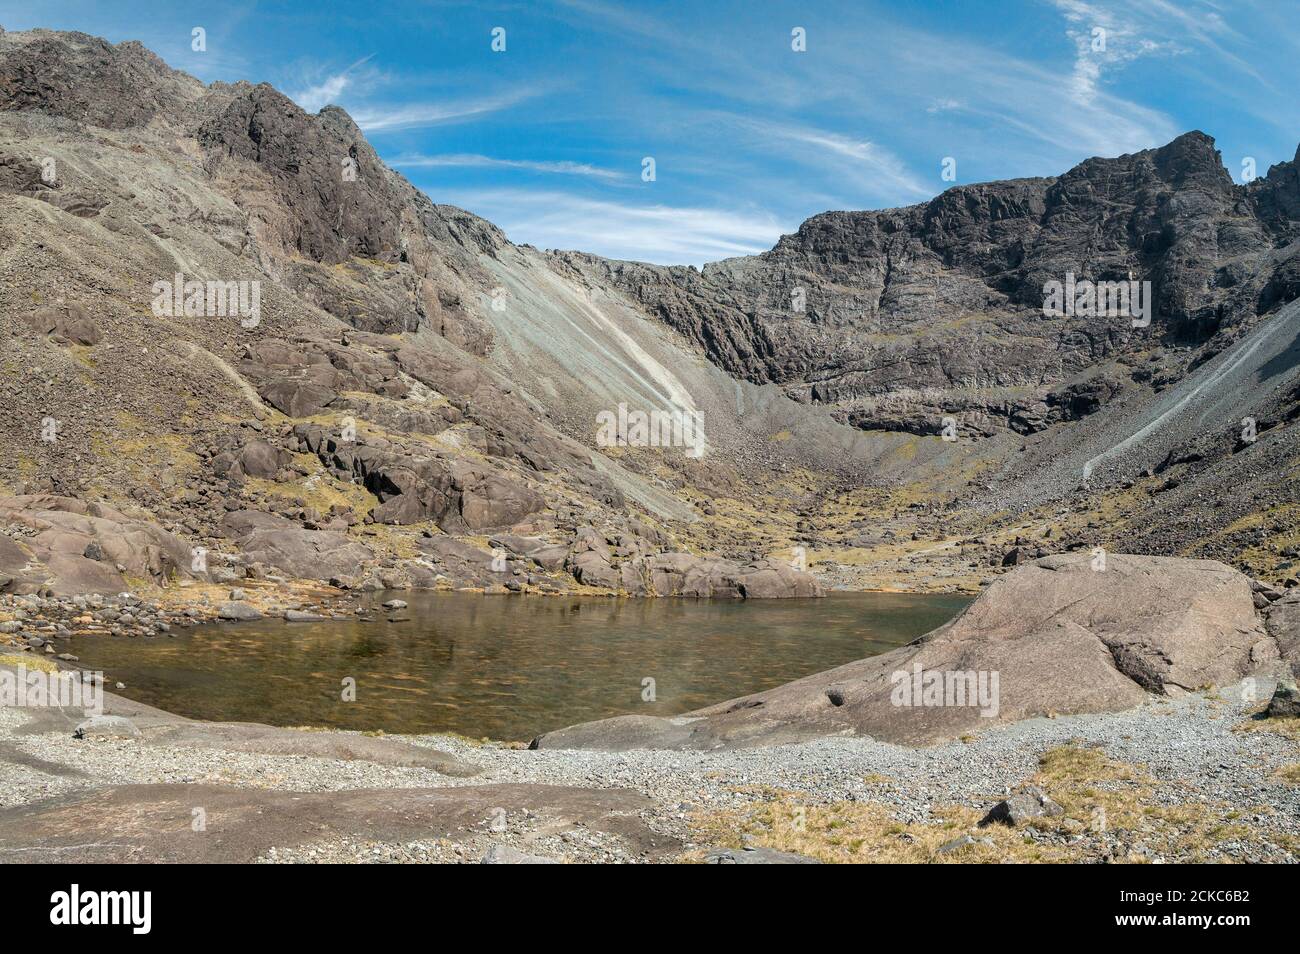 Panoramic image of Coire Lagan and Cuillin Ridge in the Black Cuillin Mountains, Isle of Skye, Scotland, UK Stock Photo